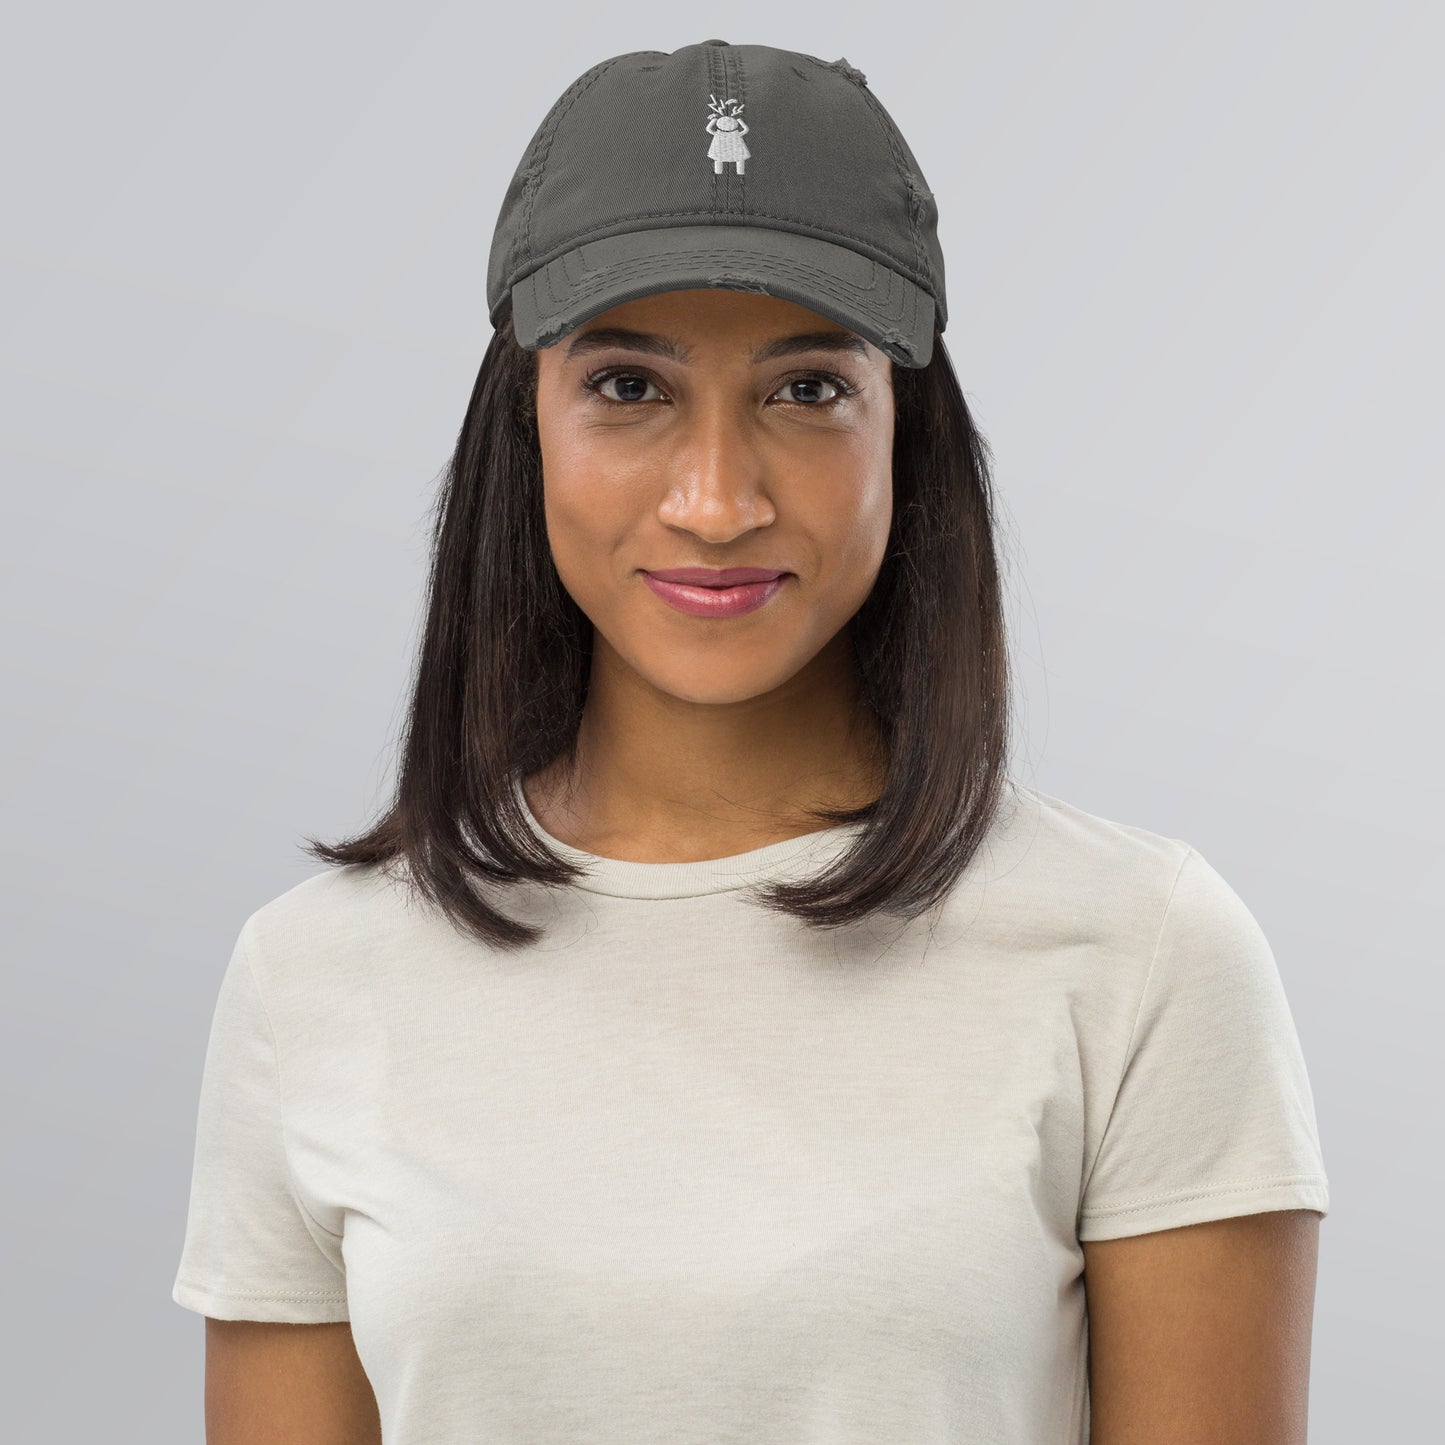 Screaming Woman Embroidered Distressed Cap